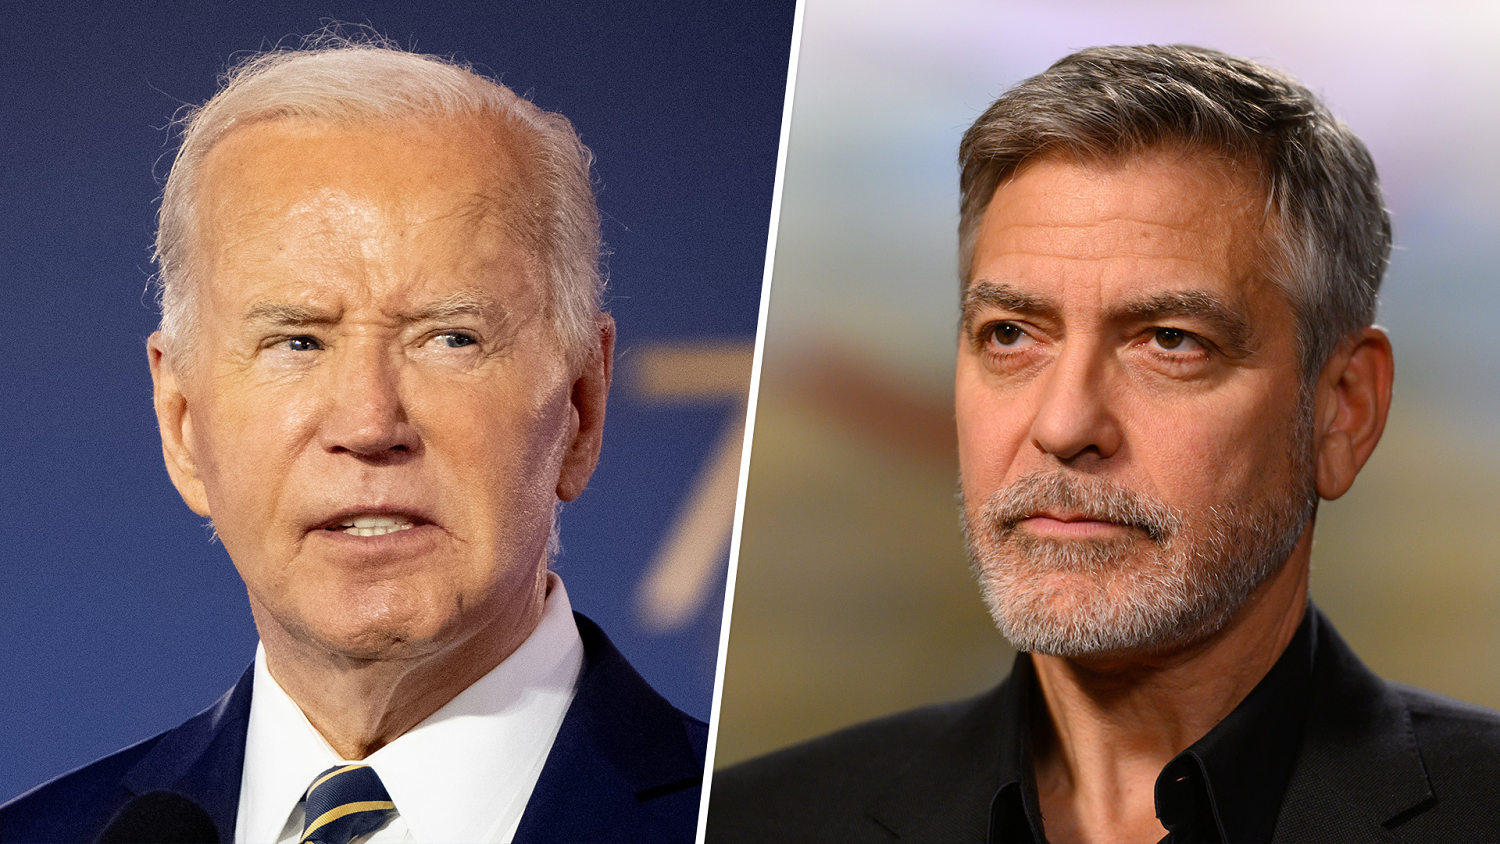 Biden loses George Clooney's support: 'We need a new nominee'